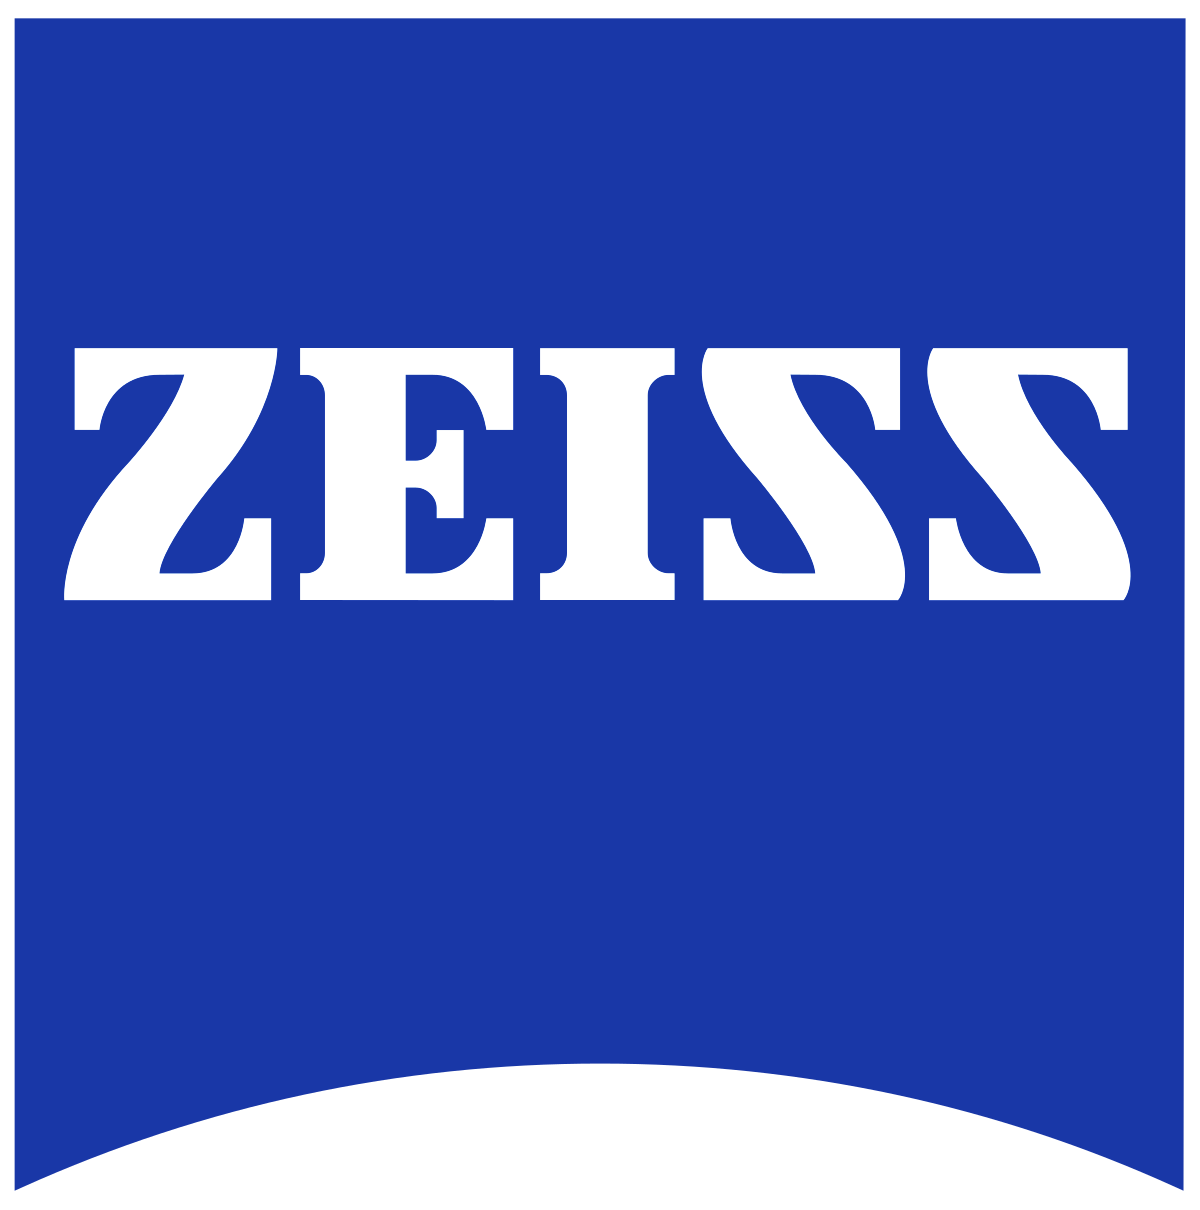 1200px-Zeiss_logo.svg.png